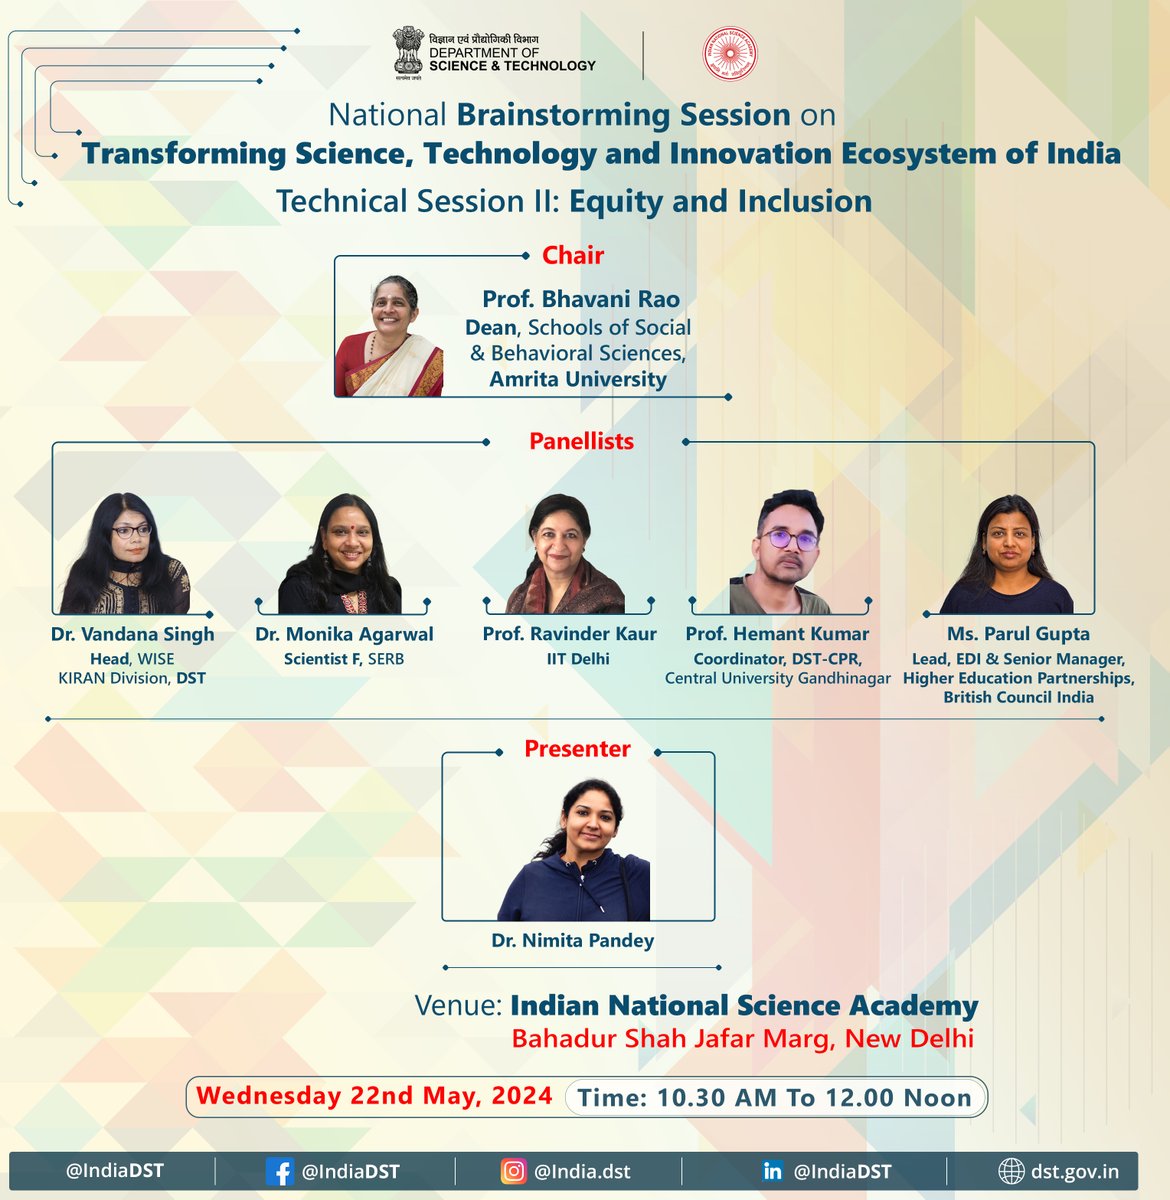 Technical session 2: '#Equity and #Inclusion' of National Brainstorming will address bias & discrimination in research & practices through awareness, policies & using inclusive language & communication strategies. 🗓️22 May 2024 ⏲️10:30 AM to 12 Noon 📍INSA, New Delhi